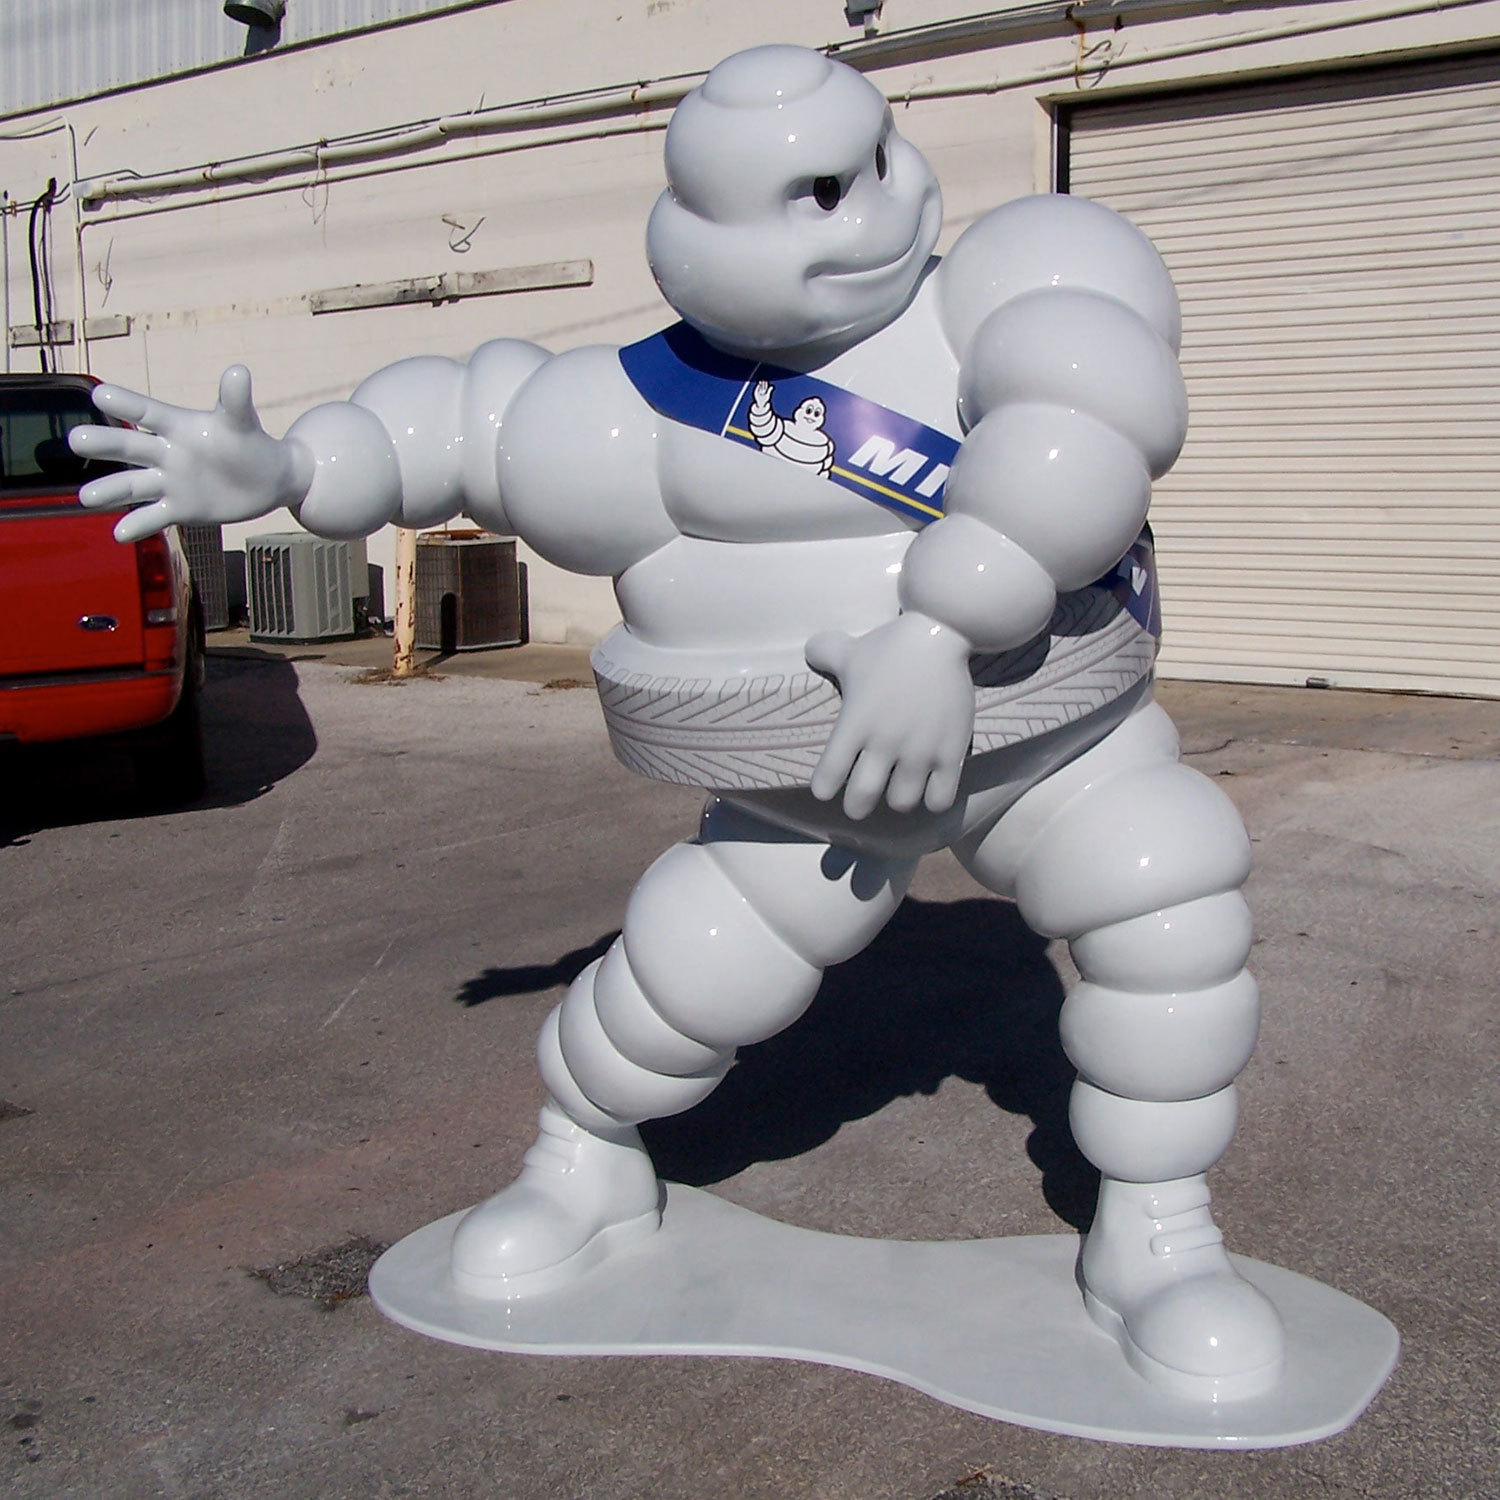 3D Sculpted life-sized white Michelin Man character statue.